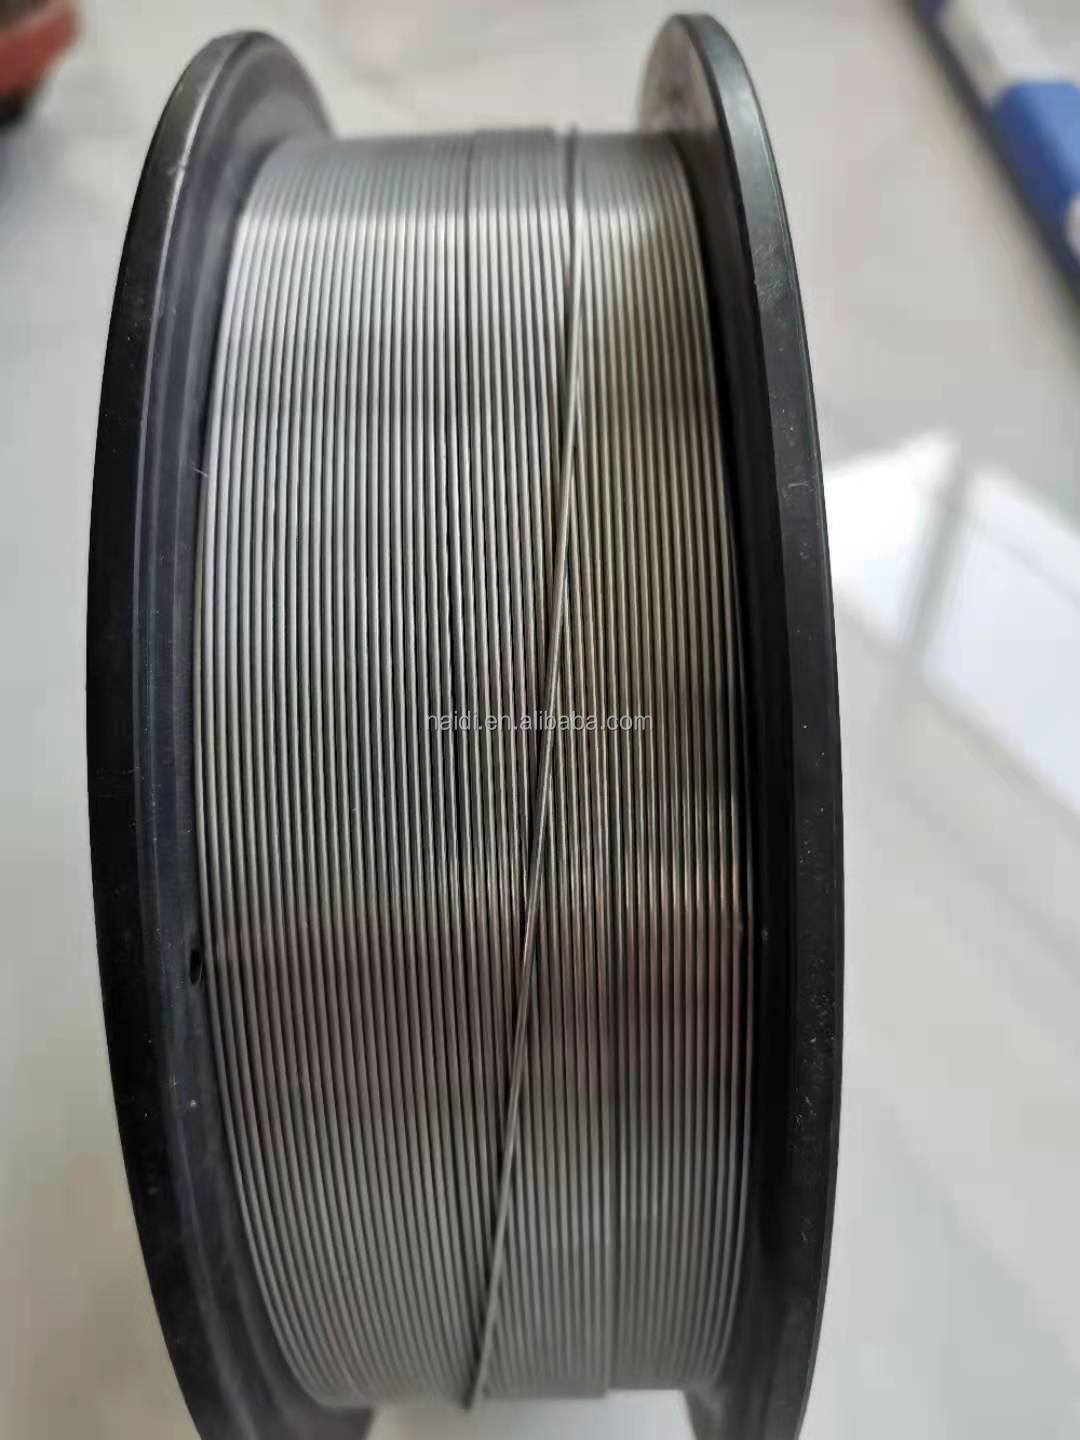 nickel based alloy Inconel 82/aws a5.14 ERNiCr-3 ernicr-1 welding wire rod price per kg 4mm for iconel 600